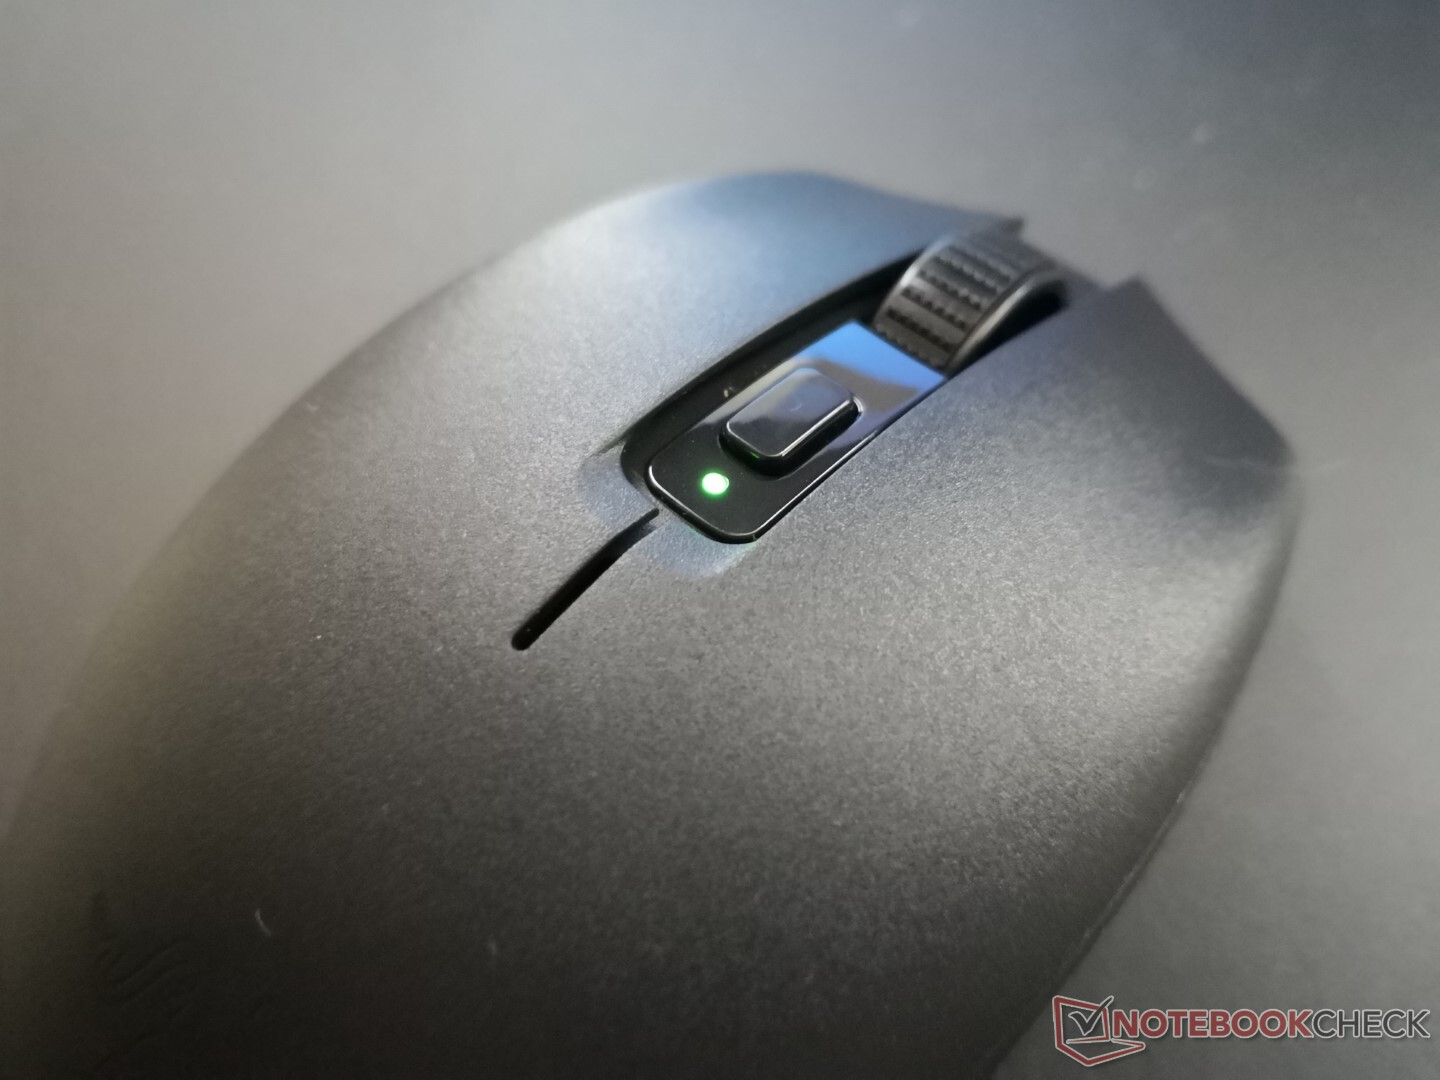 Razer Orochi V2 can switch between two different PCs with just a quick  press of a button -  News